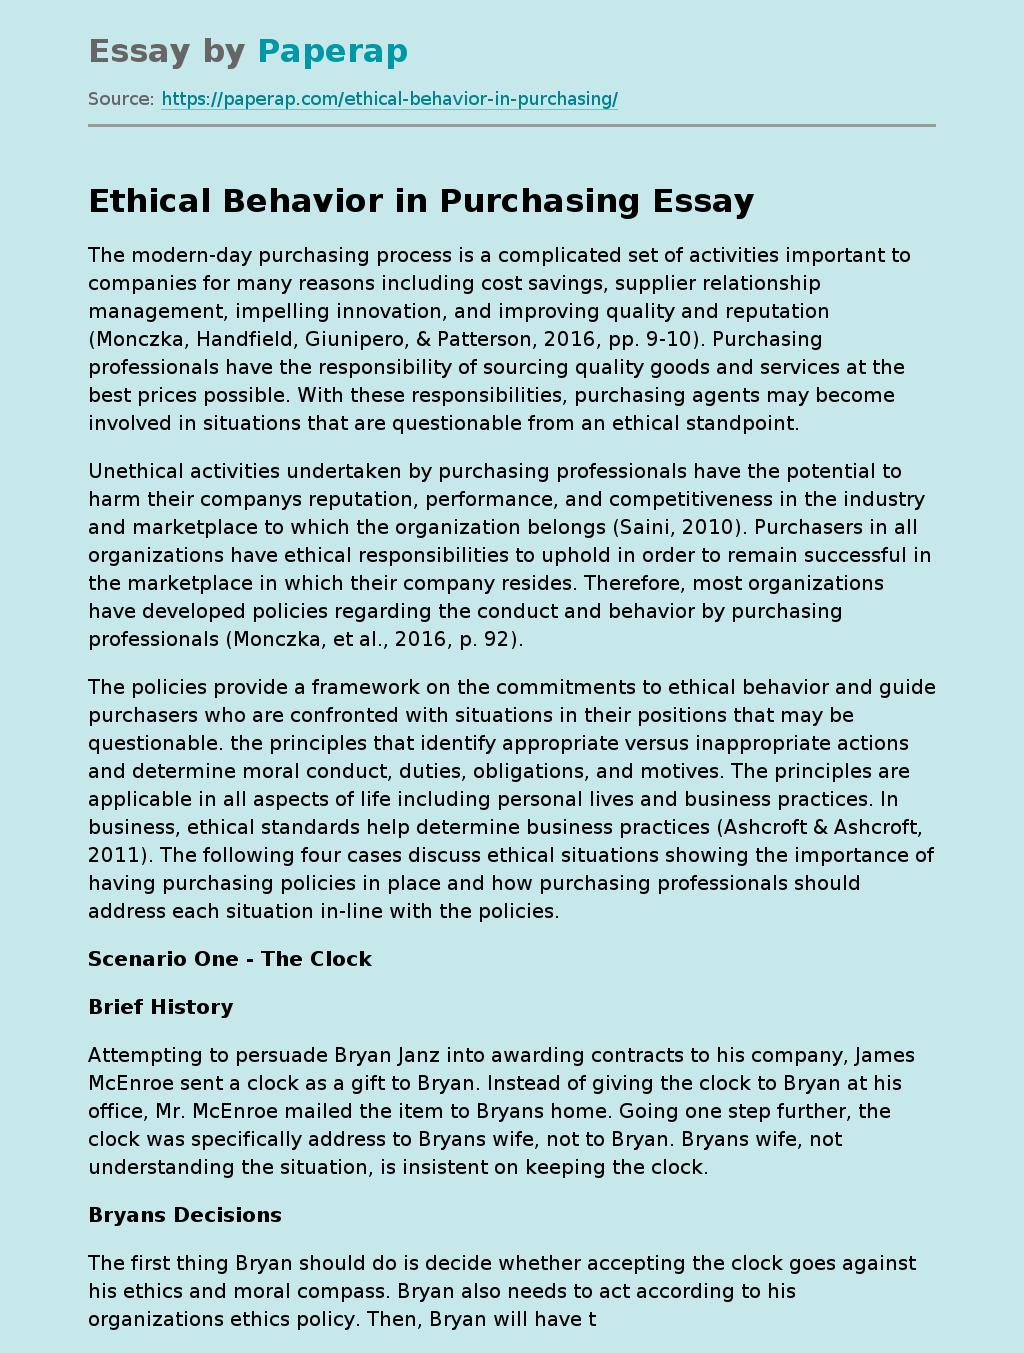 Ethical Behavior in Purchasing